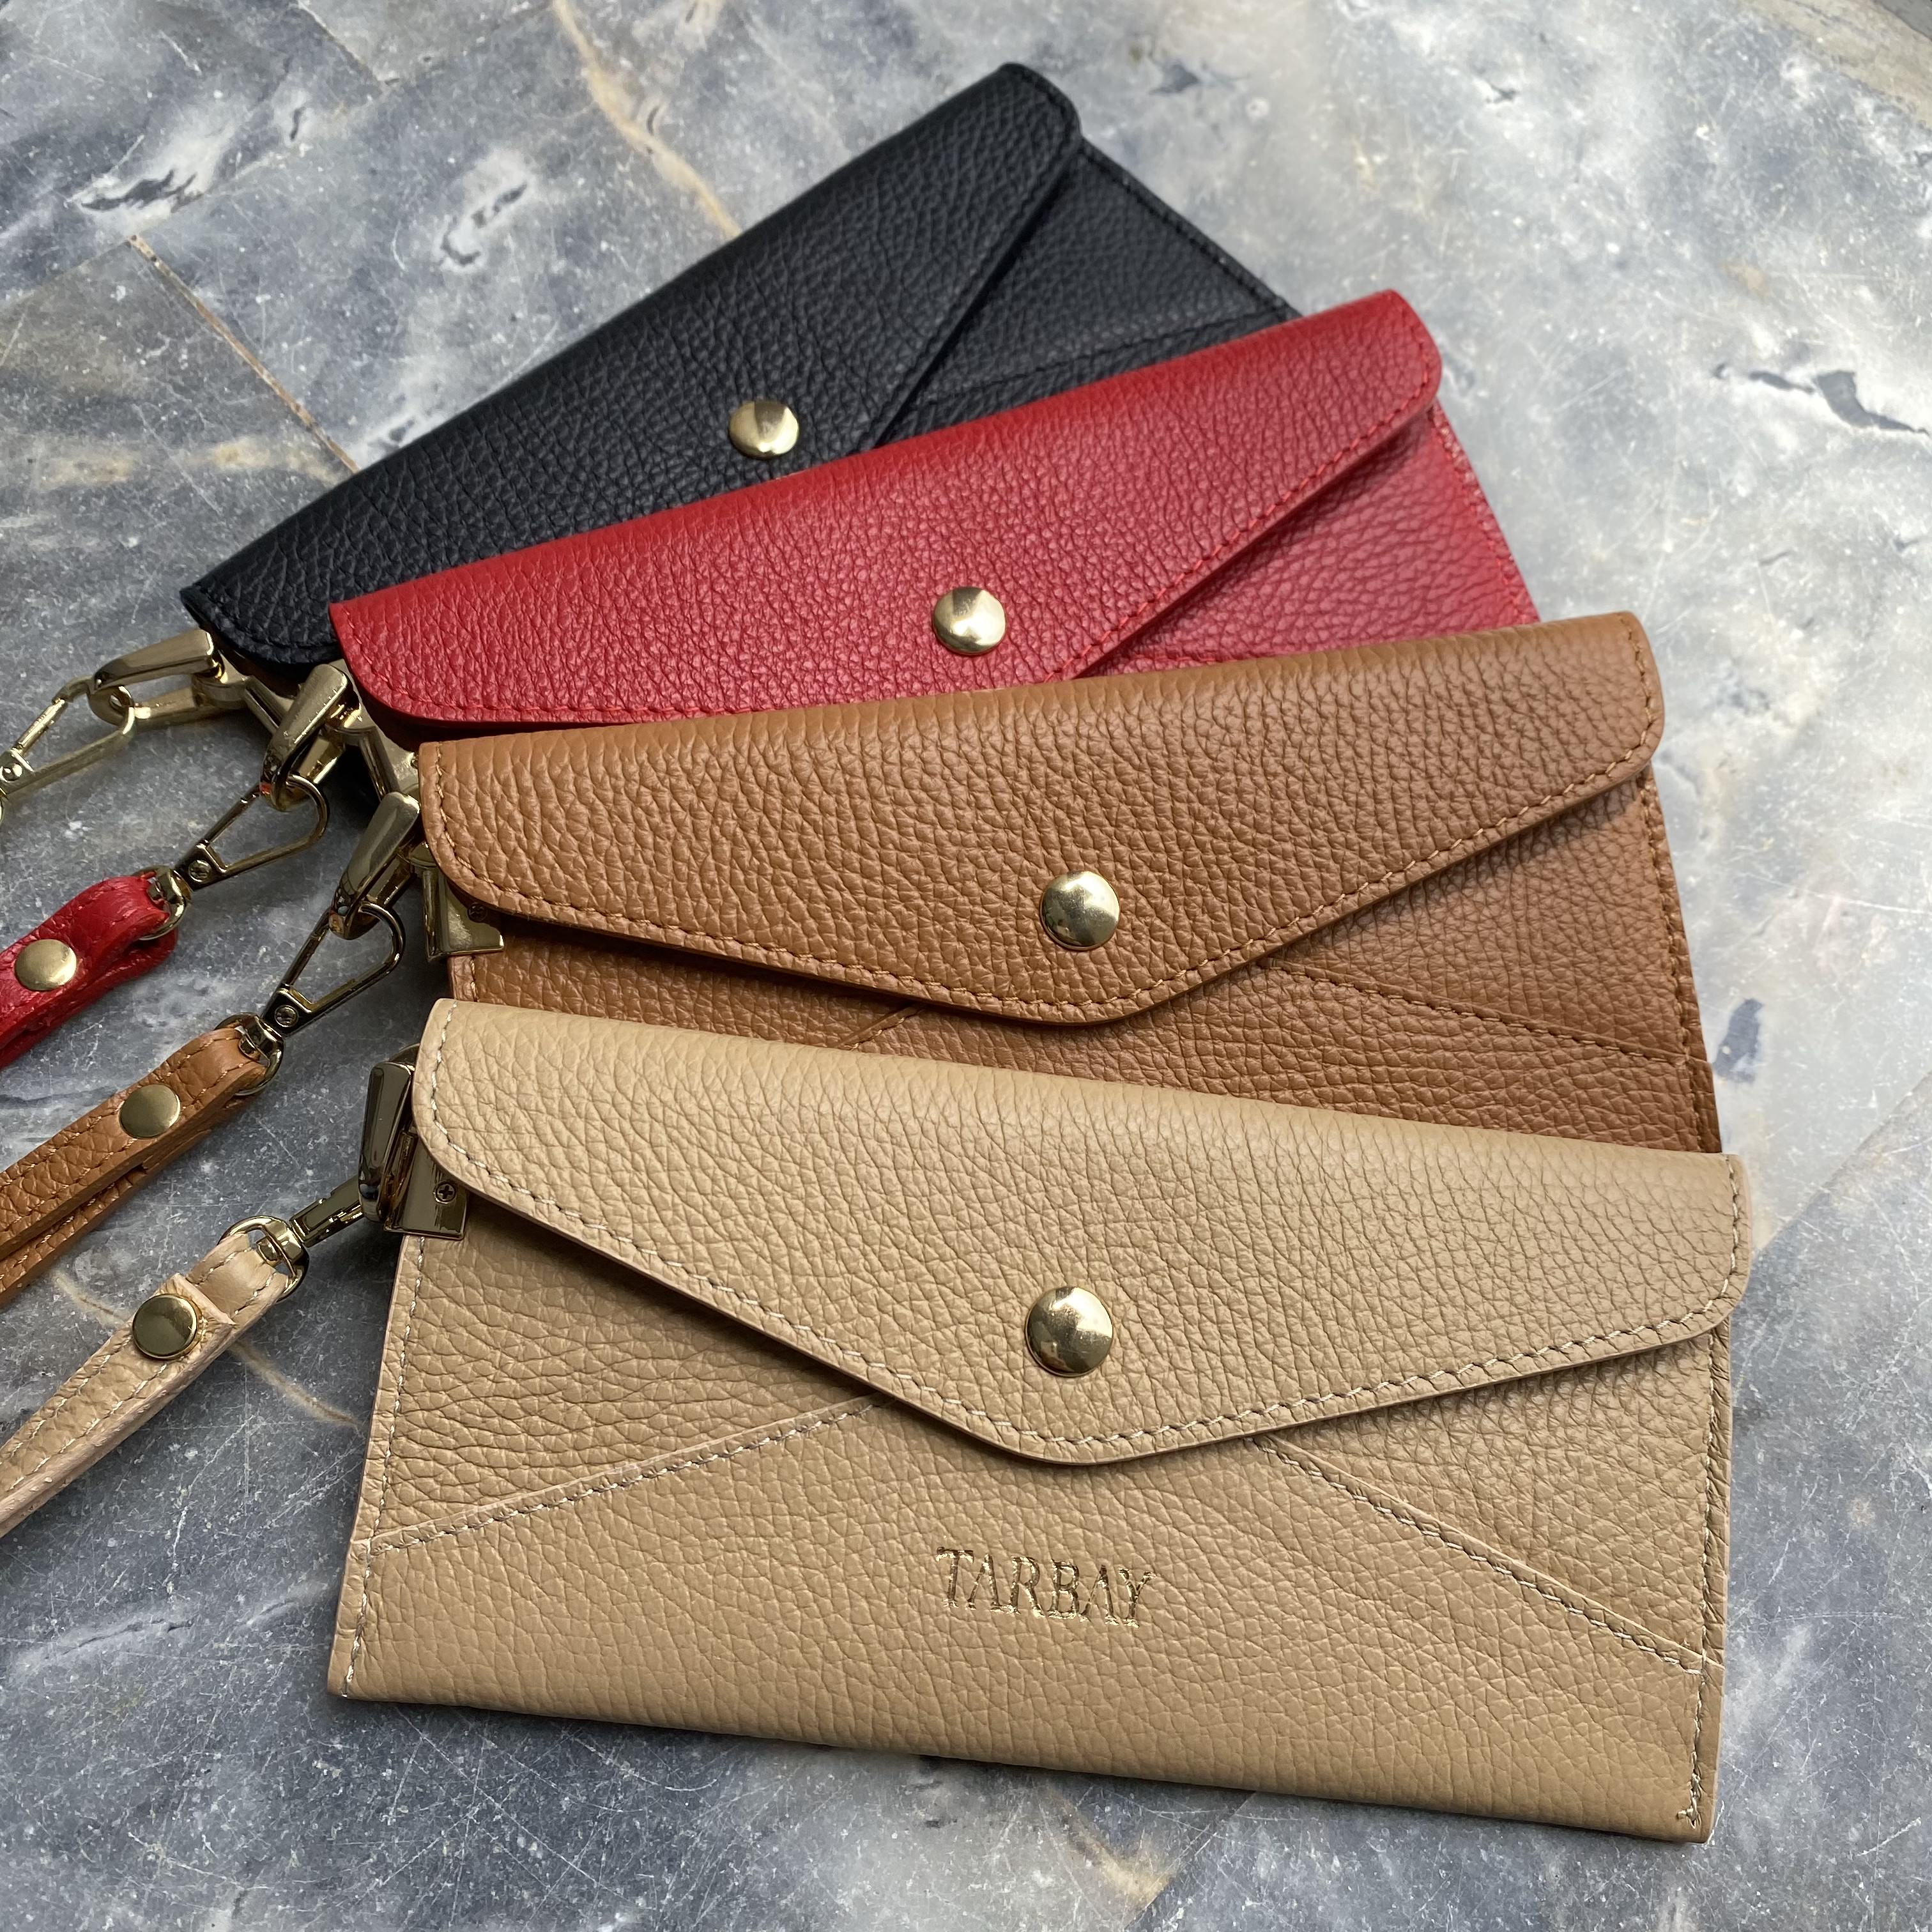 Genuine Leather Wallet #1 - Red Wallets TARBAY   